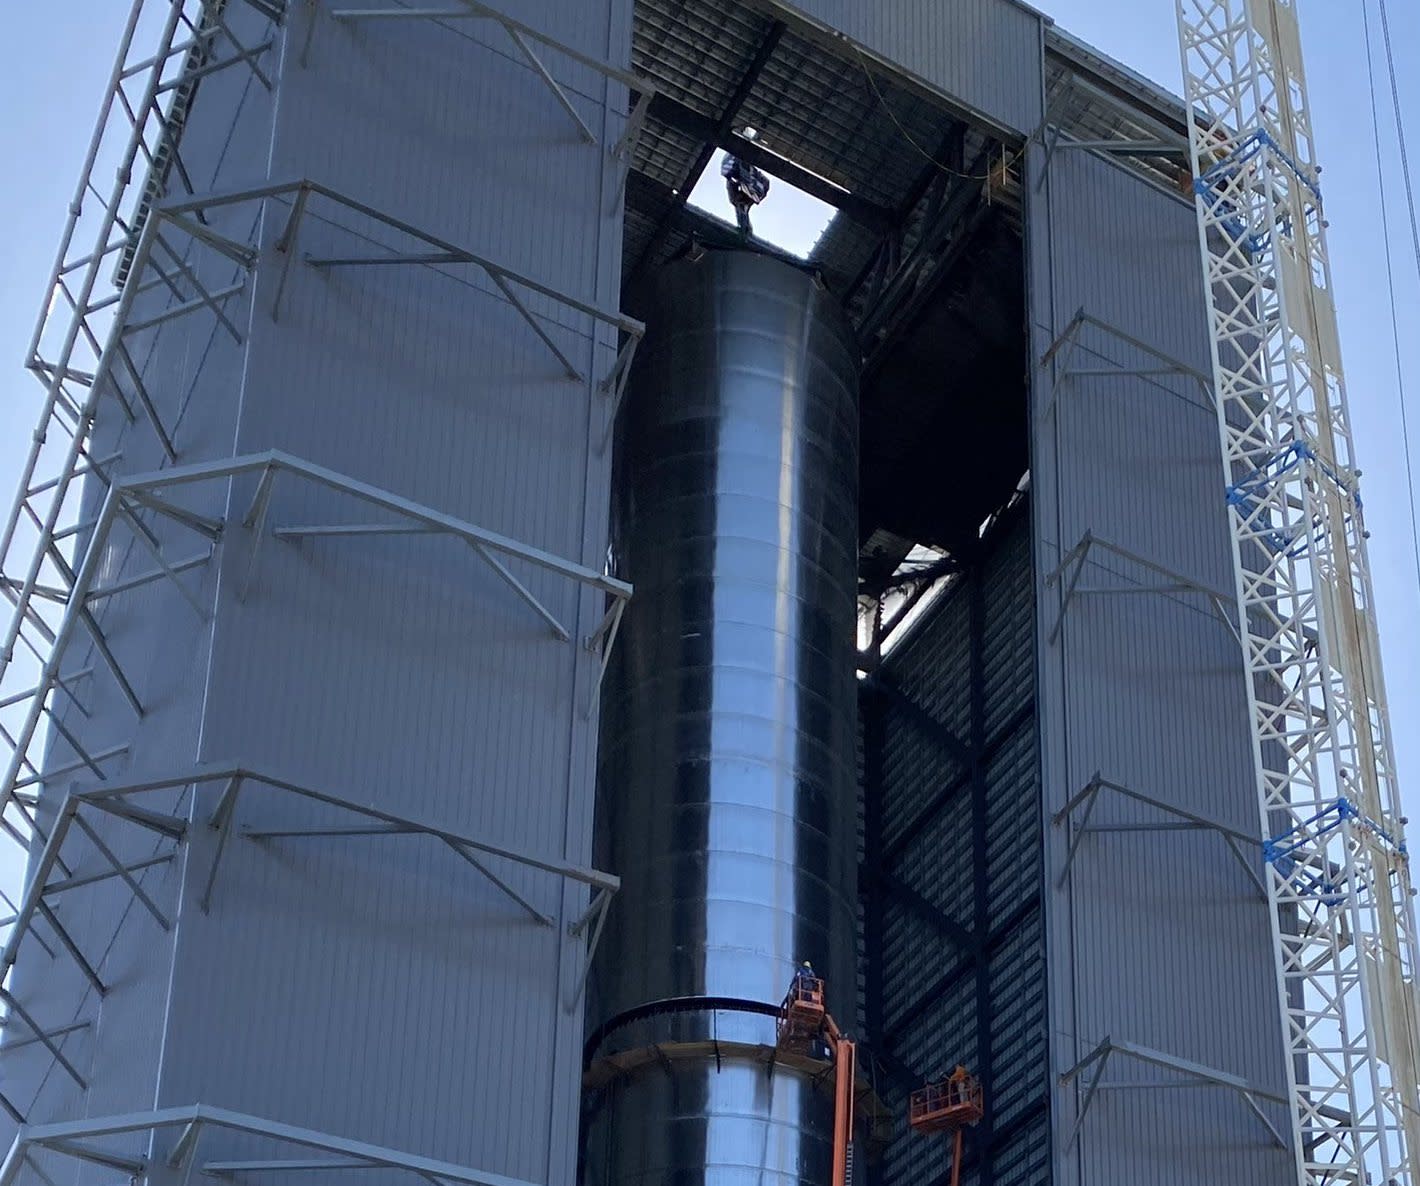 SpaceX nears final assembly of its first massive testing rocket booster for Starship